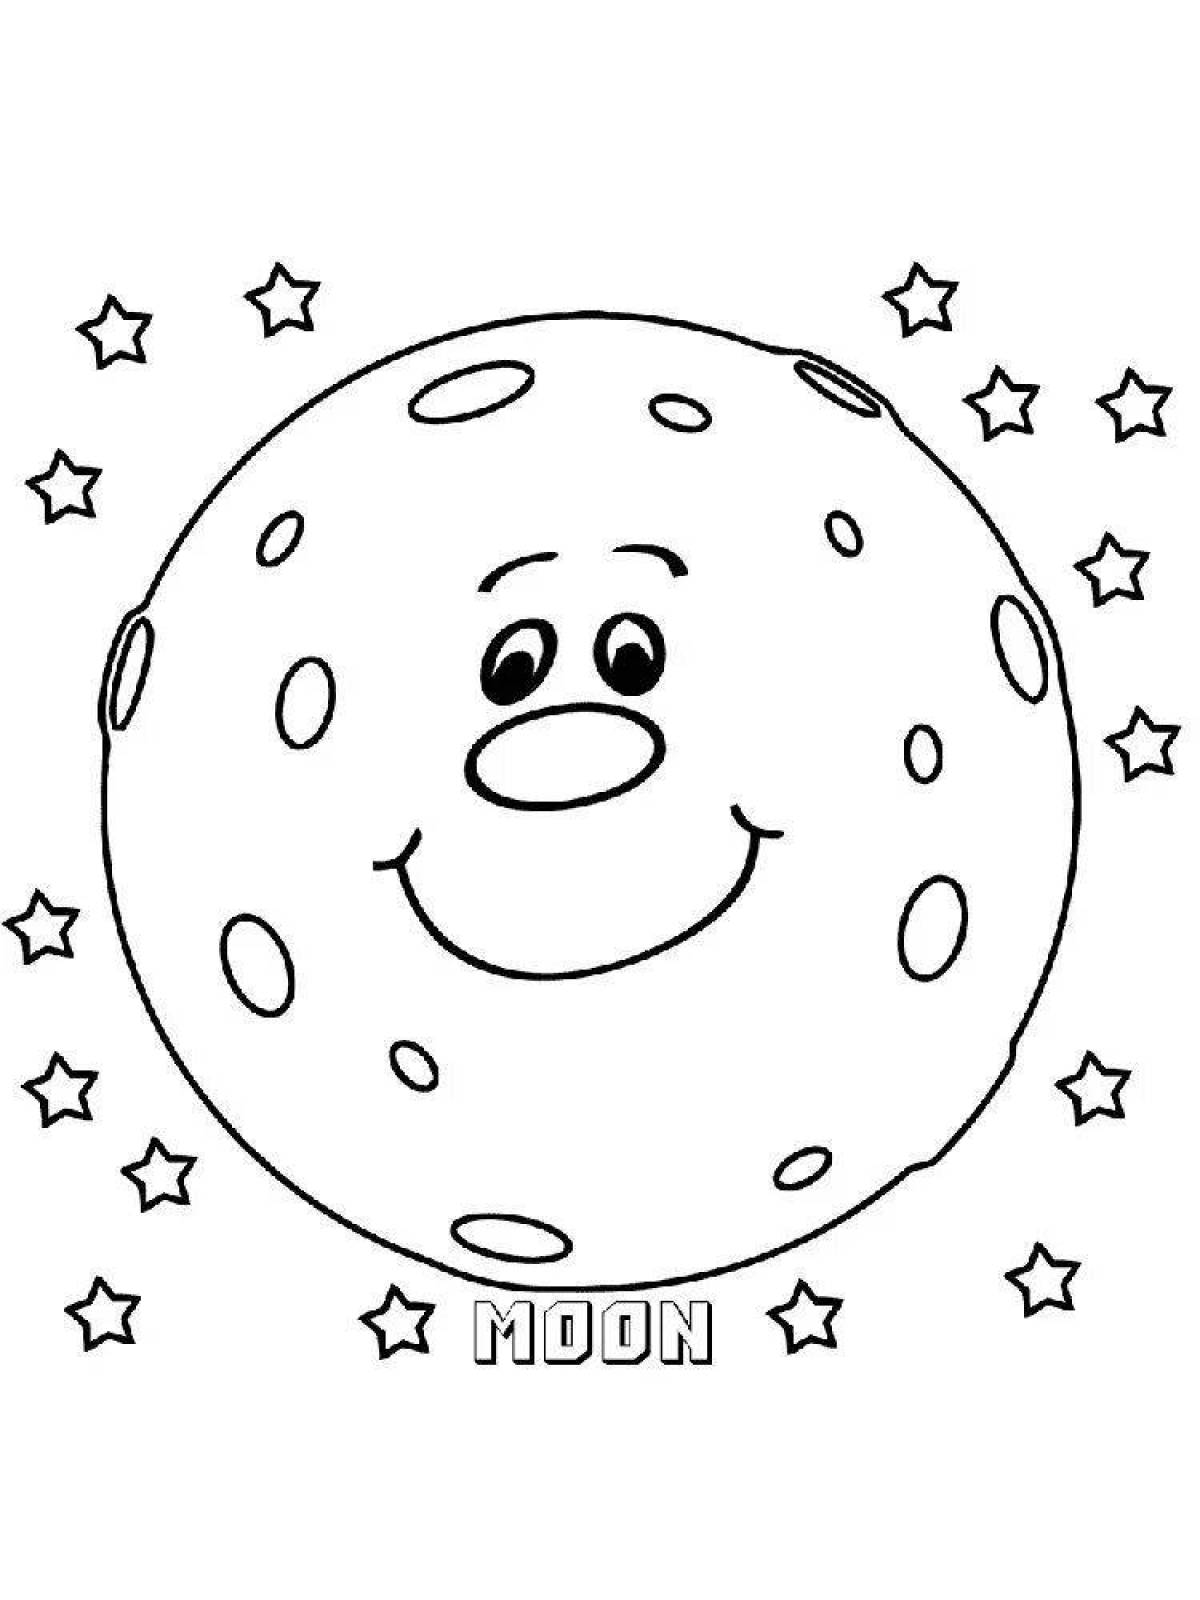 Charming moon coloring for kids